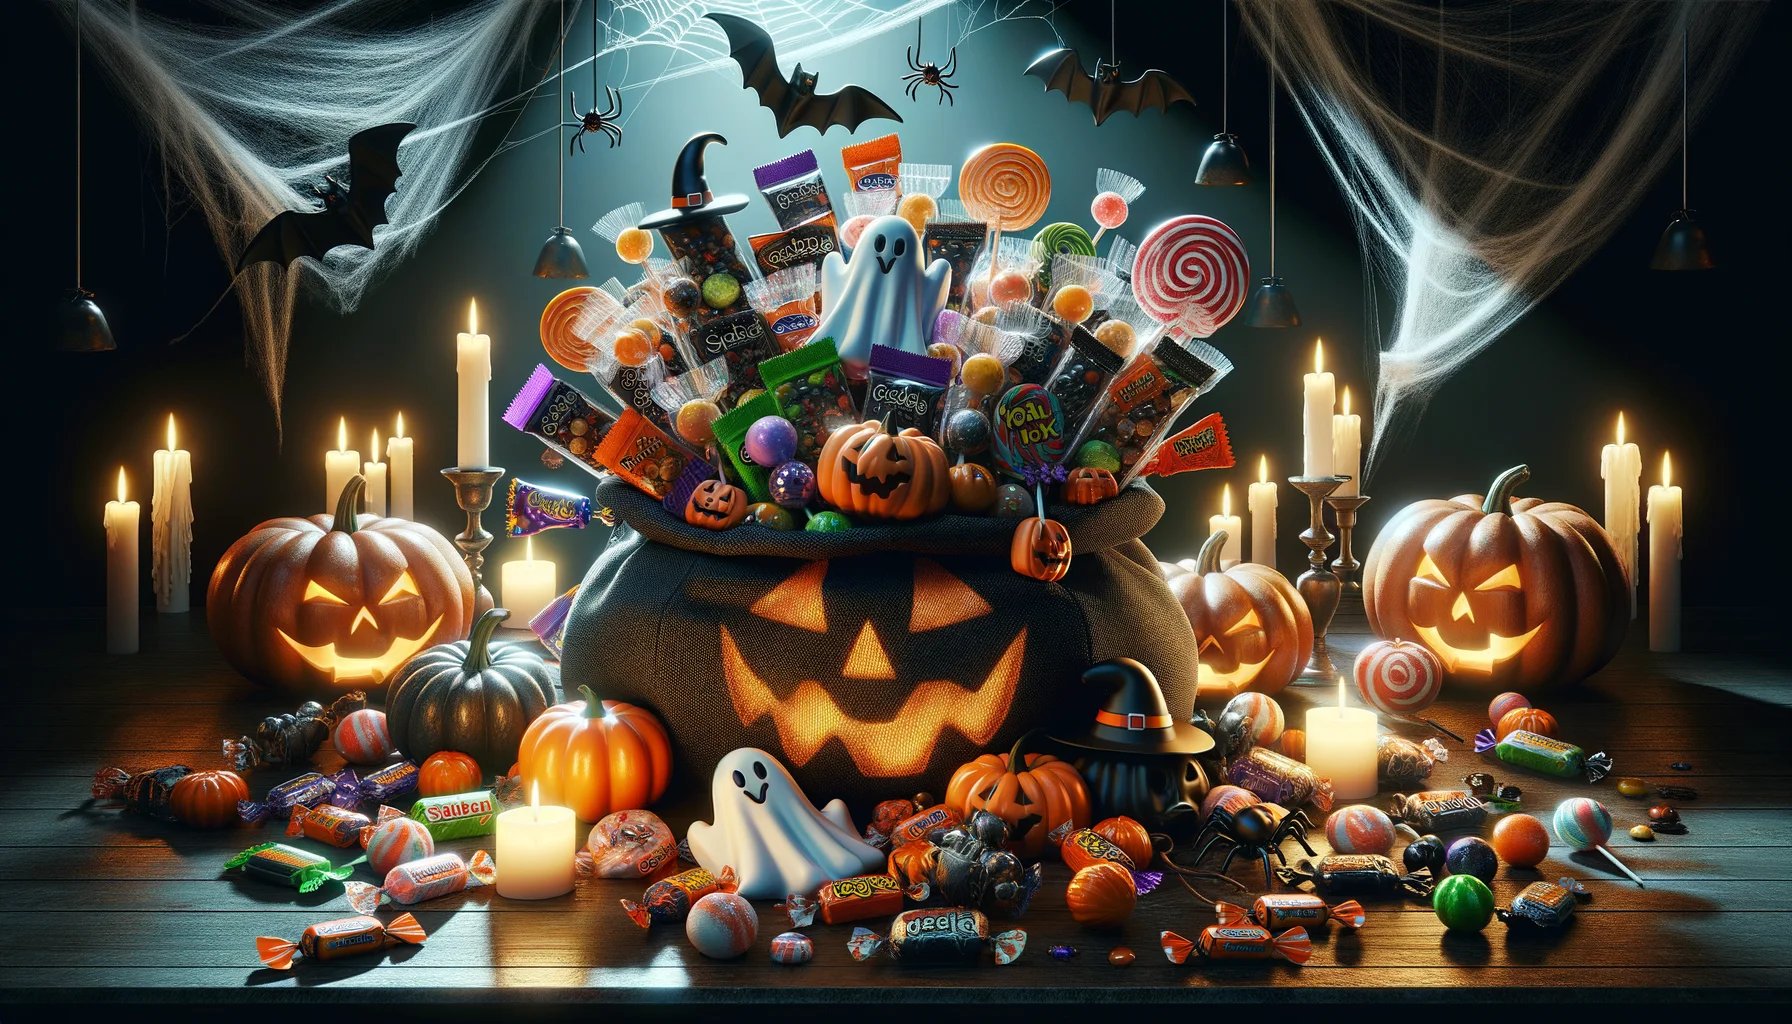 Realistic image capturing the festive atmosphere of Halloween. Featured at the center are Halloween-themed candy packs, overflowing with a diverse selection of sweets, confections, and lollipops in suggestive forms like ghost, pumpkin, bat, and witch shape. The candy packs are set against a spooky backdrop adorned with typical Halloween paraphernalia - carved pumpkins, flickering candles, cobwebs, and faux spiders. The light is dim and the shadows dance, creating a mysterious yet fun ambiance. An unexpected twist is added to the image for humor, perhaps the candies playing tricks on each other, parodying horror movie scenes.